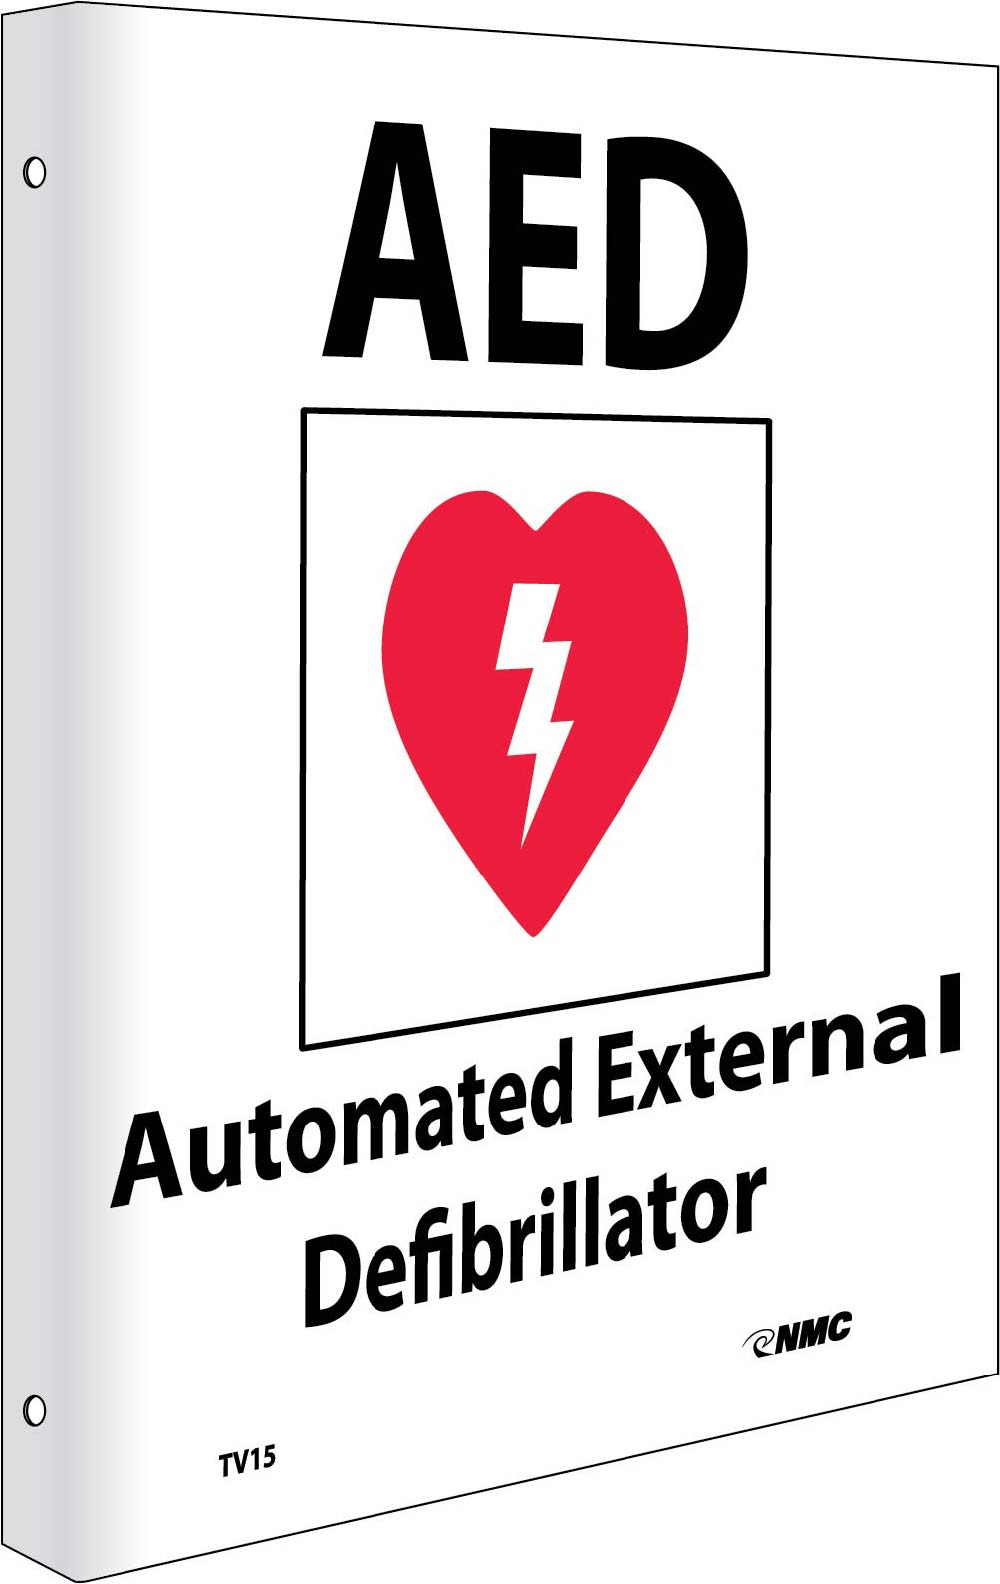 2-View Aed Automated External Defibrillator Sign-eSafety Supplies, Inc